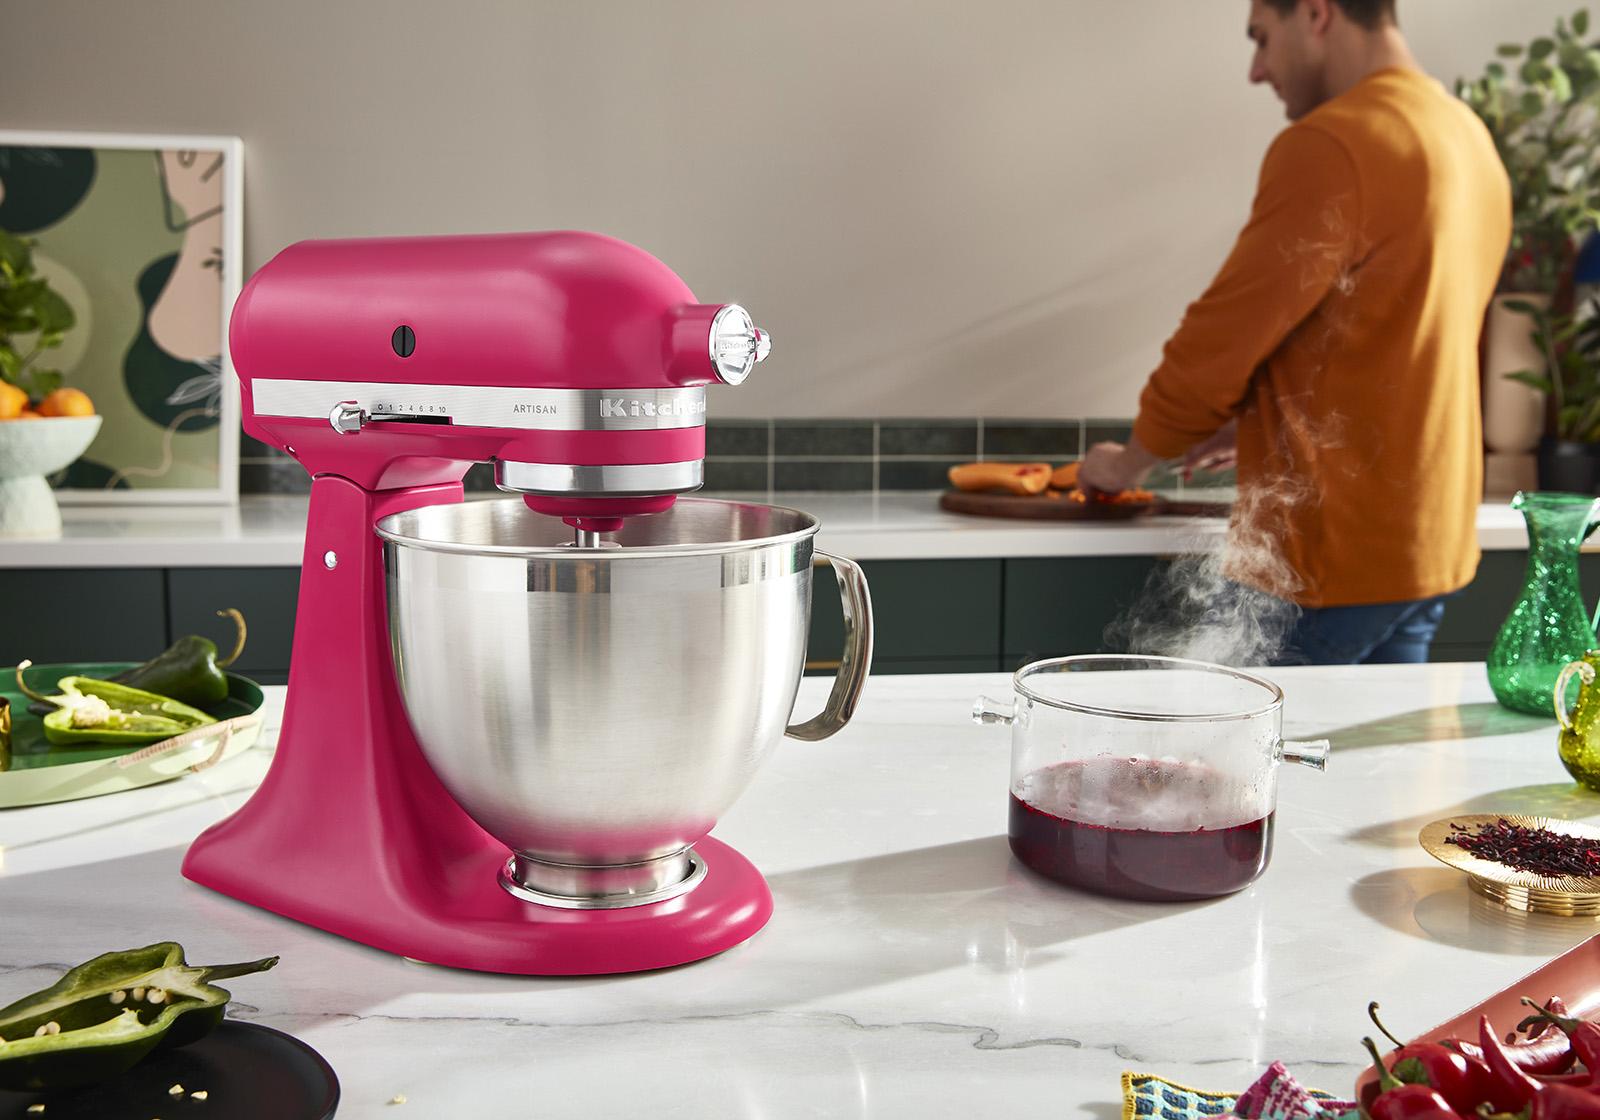 KitchenAid names - Restaurant Guides 2023 the of Hibiscus its year Color as Calendar